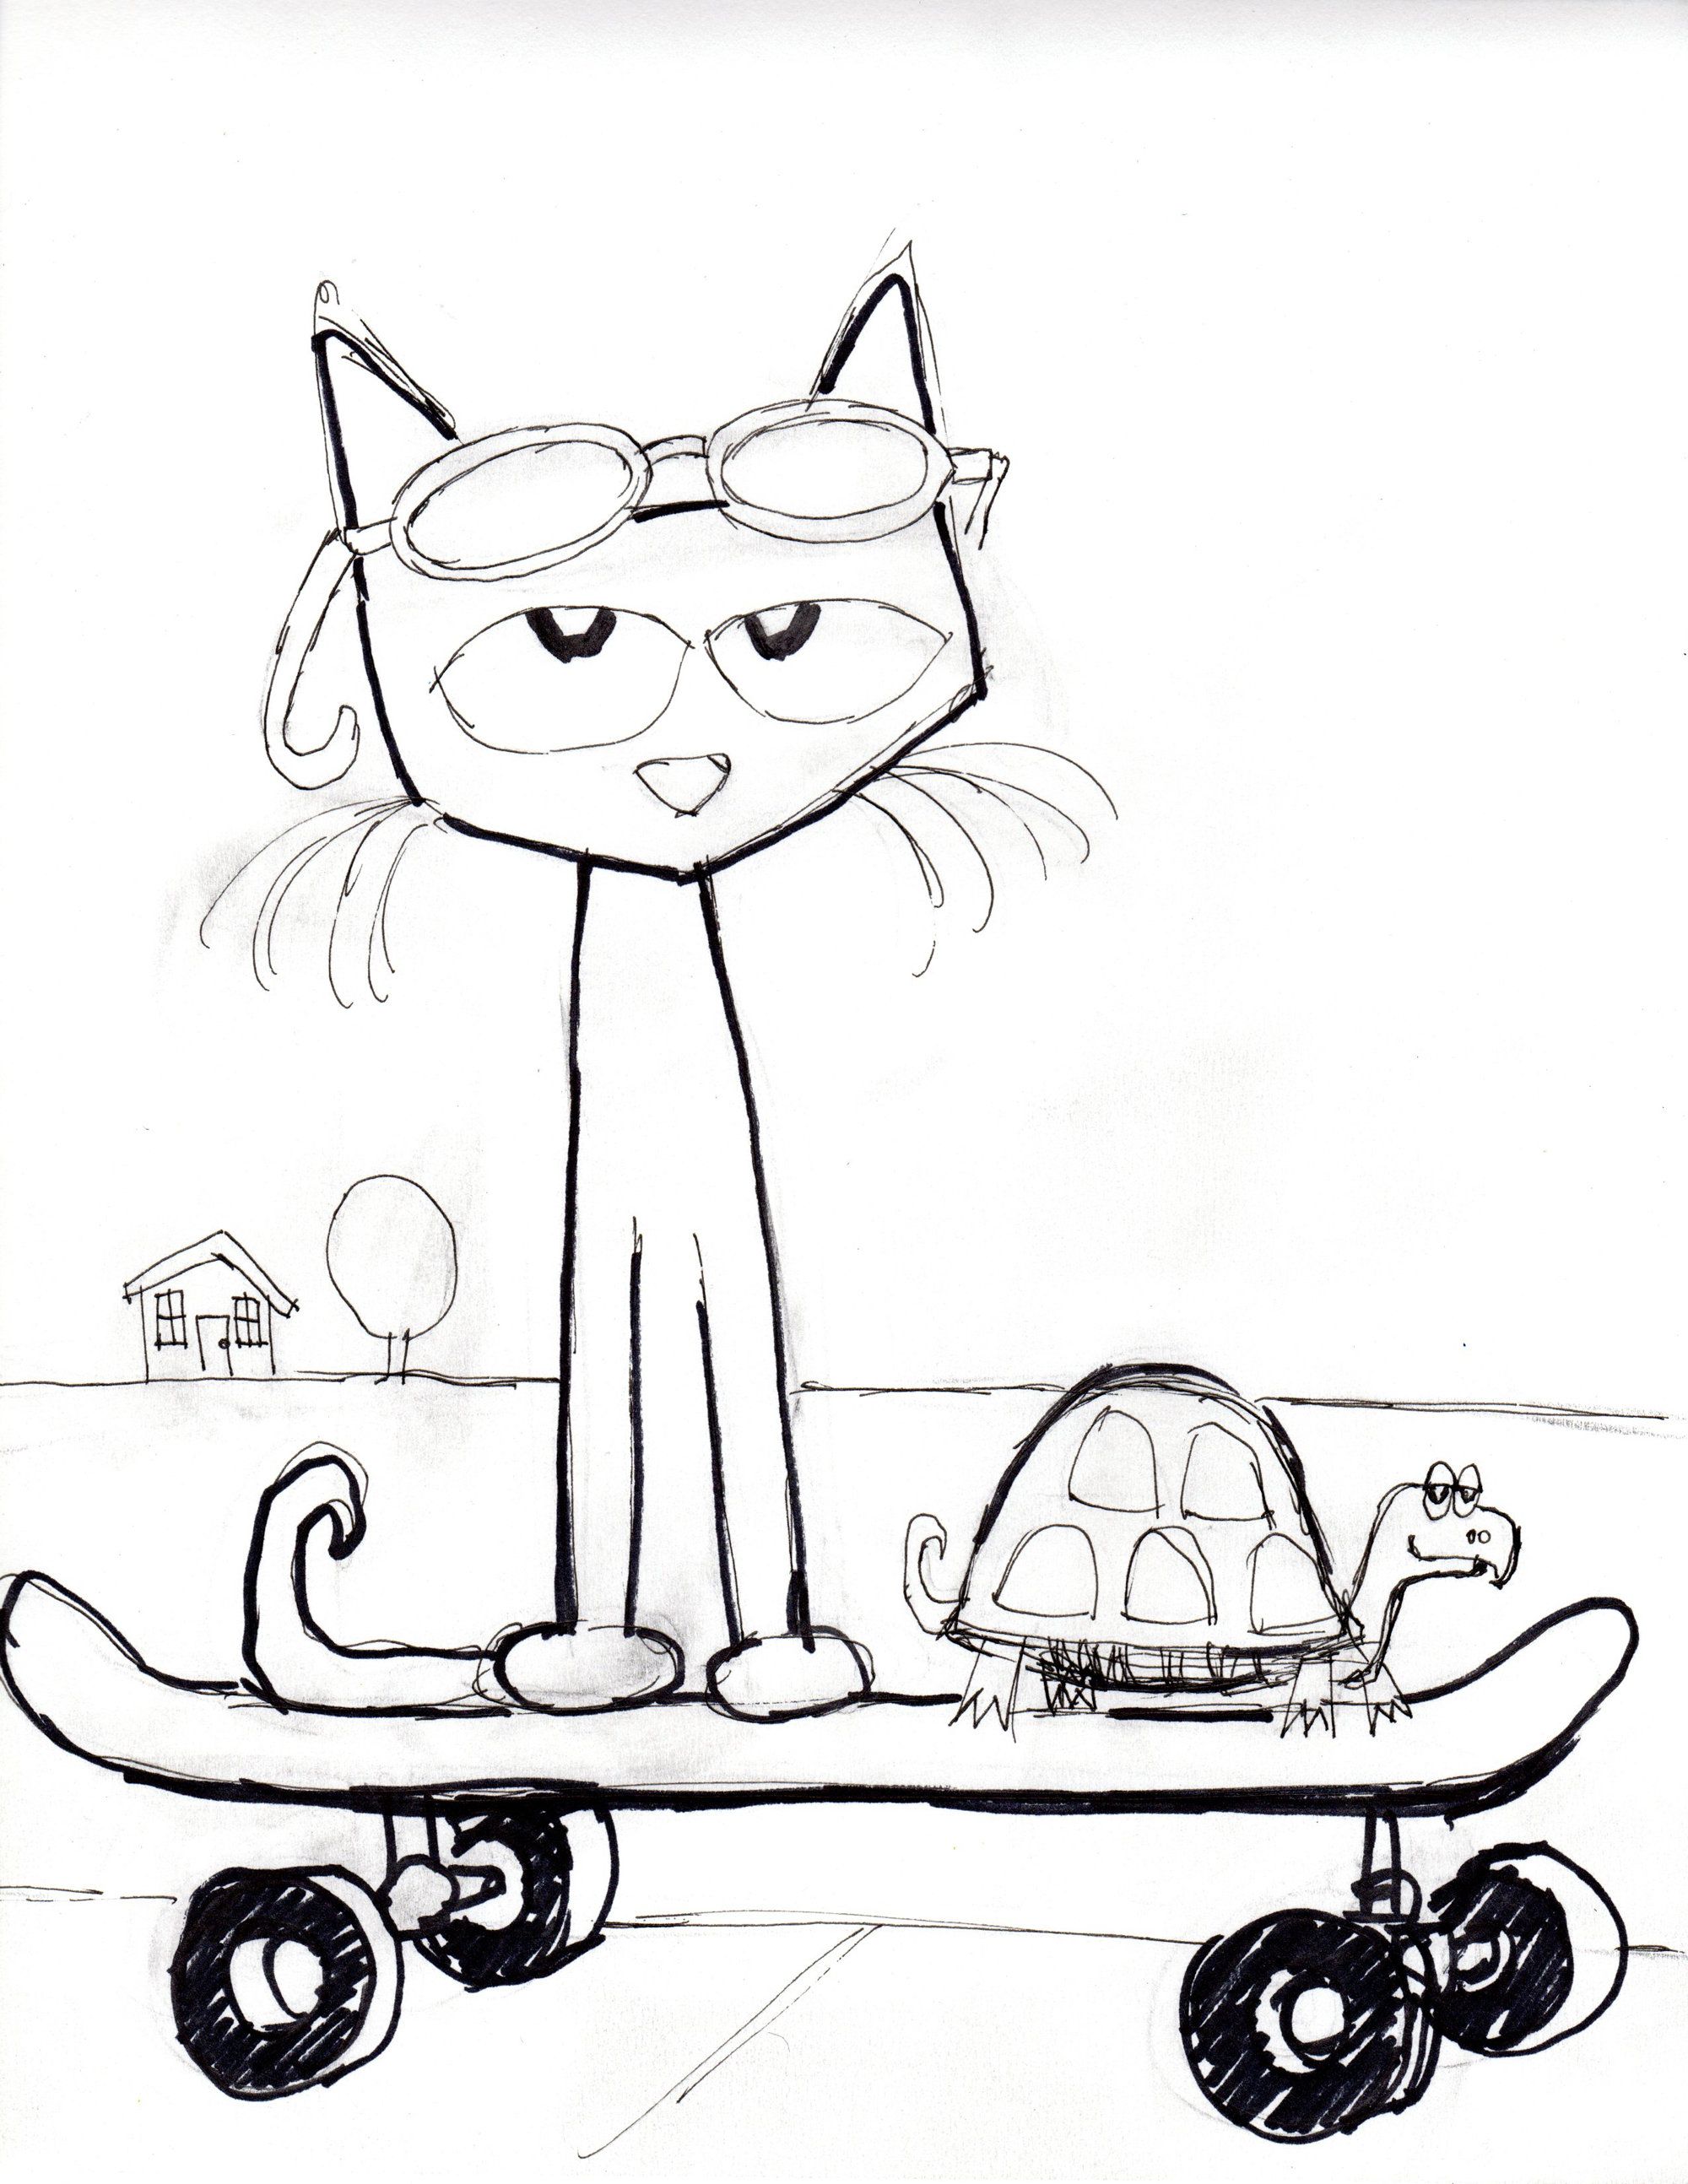 Pete The Cat Coloring Page Coloring Home